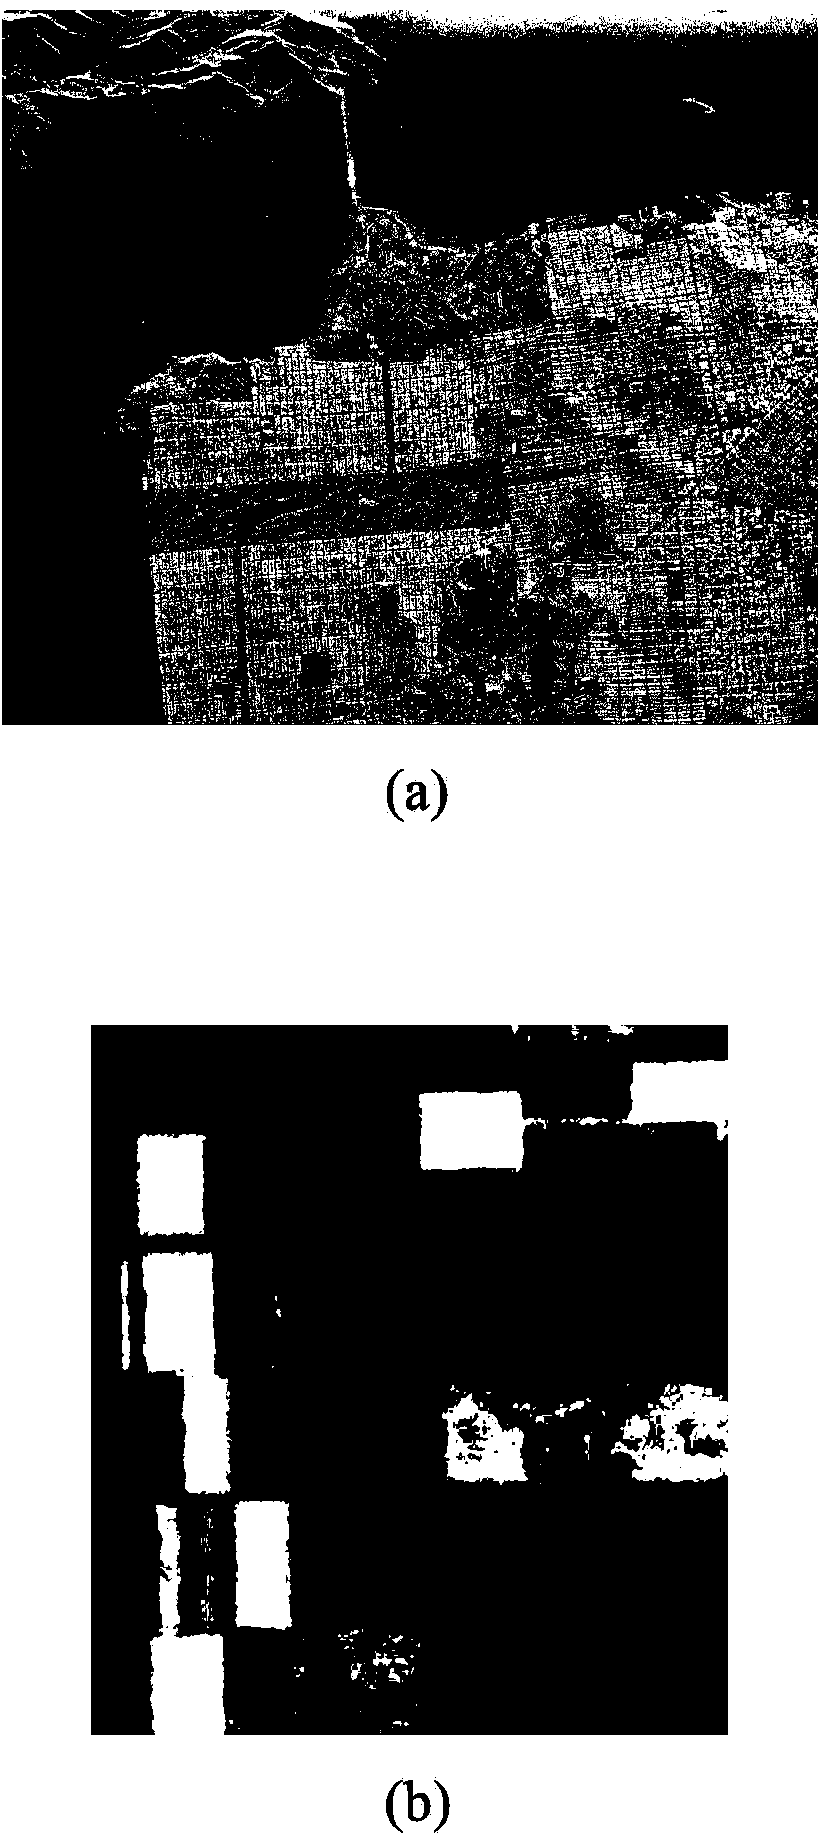 Polarization SAR (synthetic aperture radar) image classification method based on Freeman decomposition and PSO (particle swarm optimization)